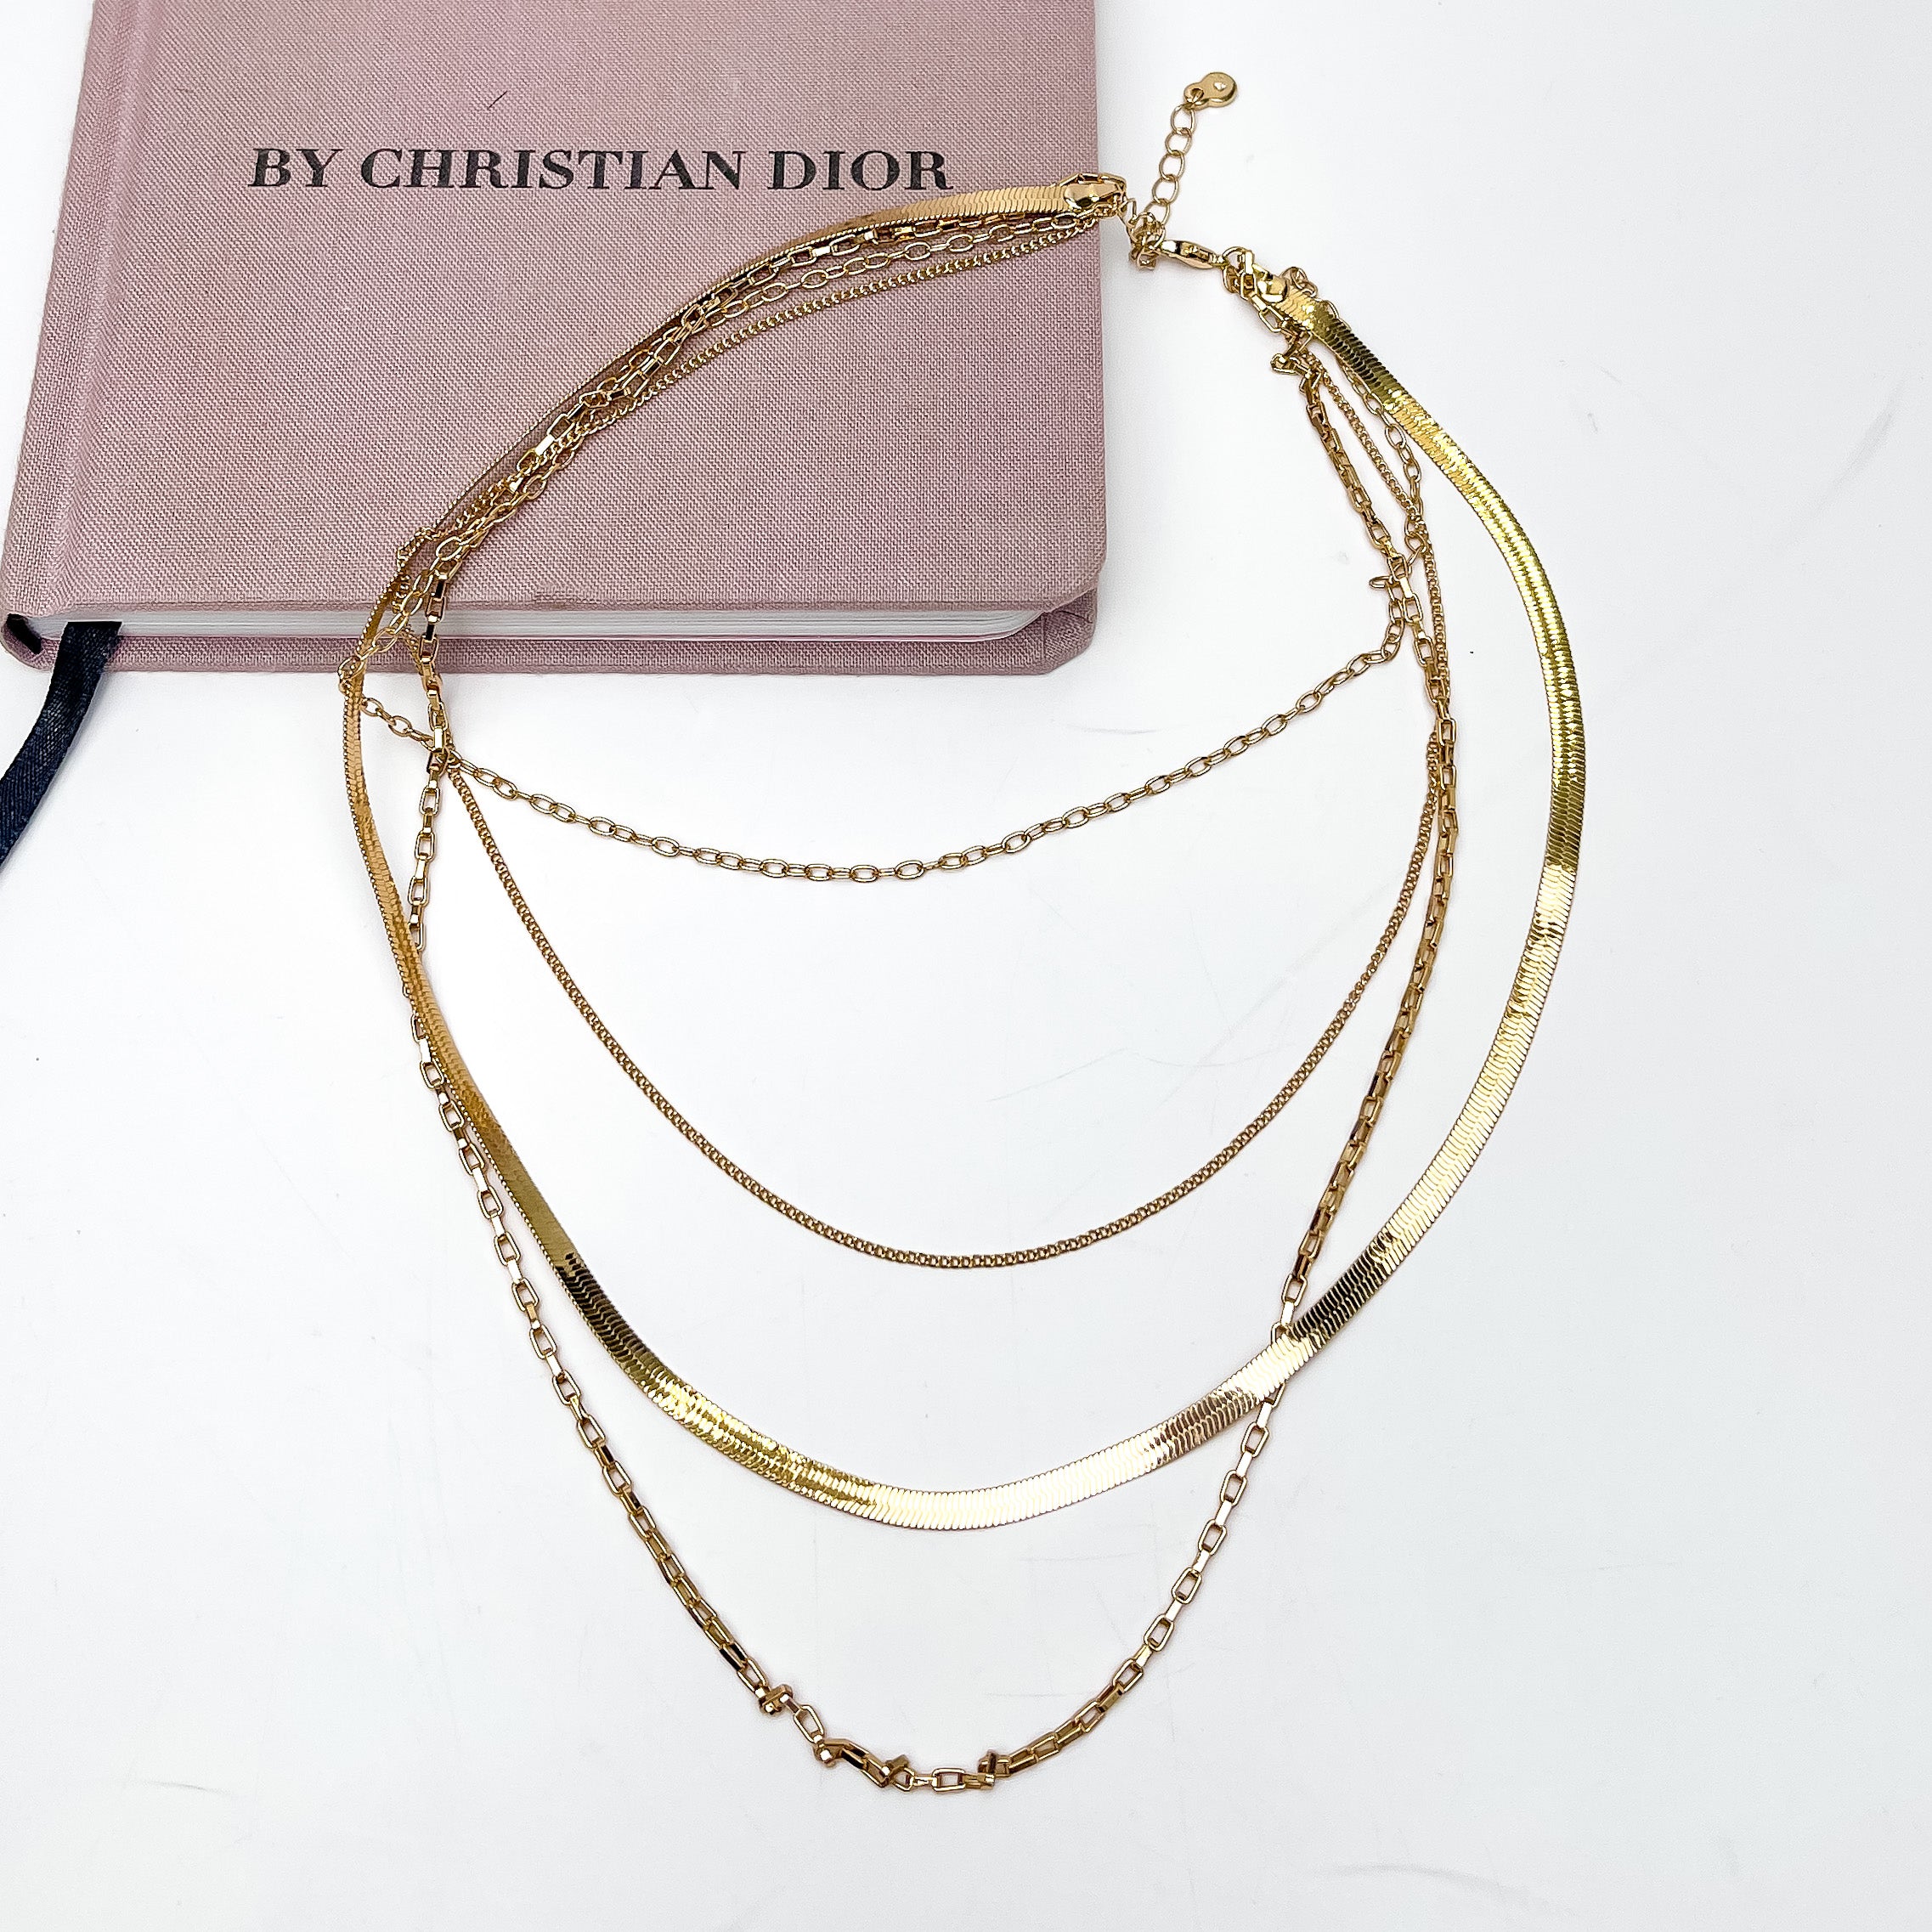 Memorable Moment Multi Strand Gold Tone Necklace. This necklace is partly on a pink book with a white background.